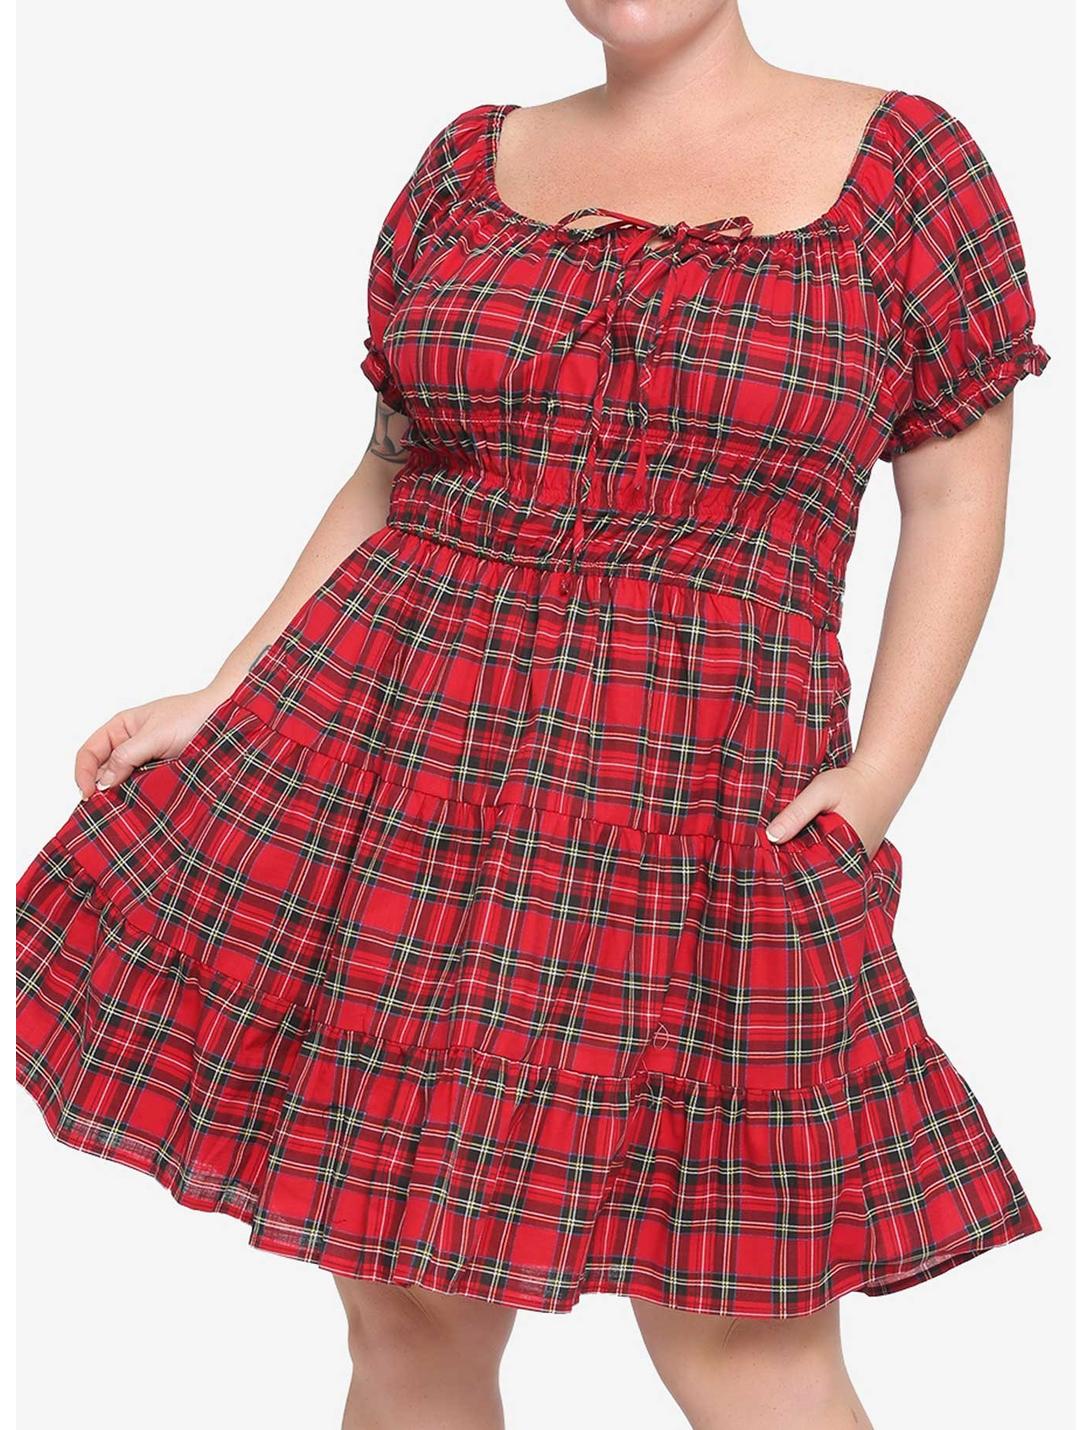 Red Plaid Tie-Front Babydoll Dress Plus Size, PLAID - RED, hi-res